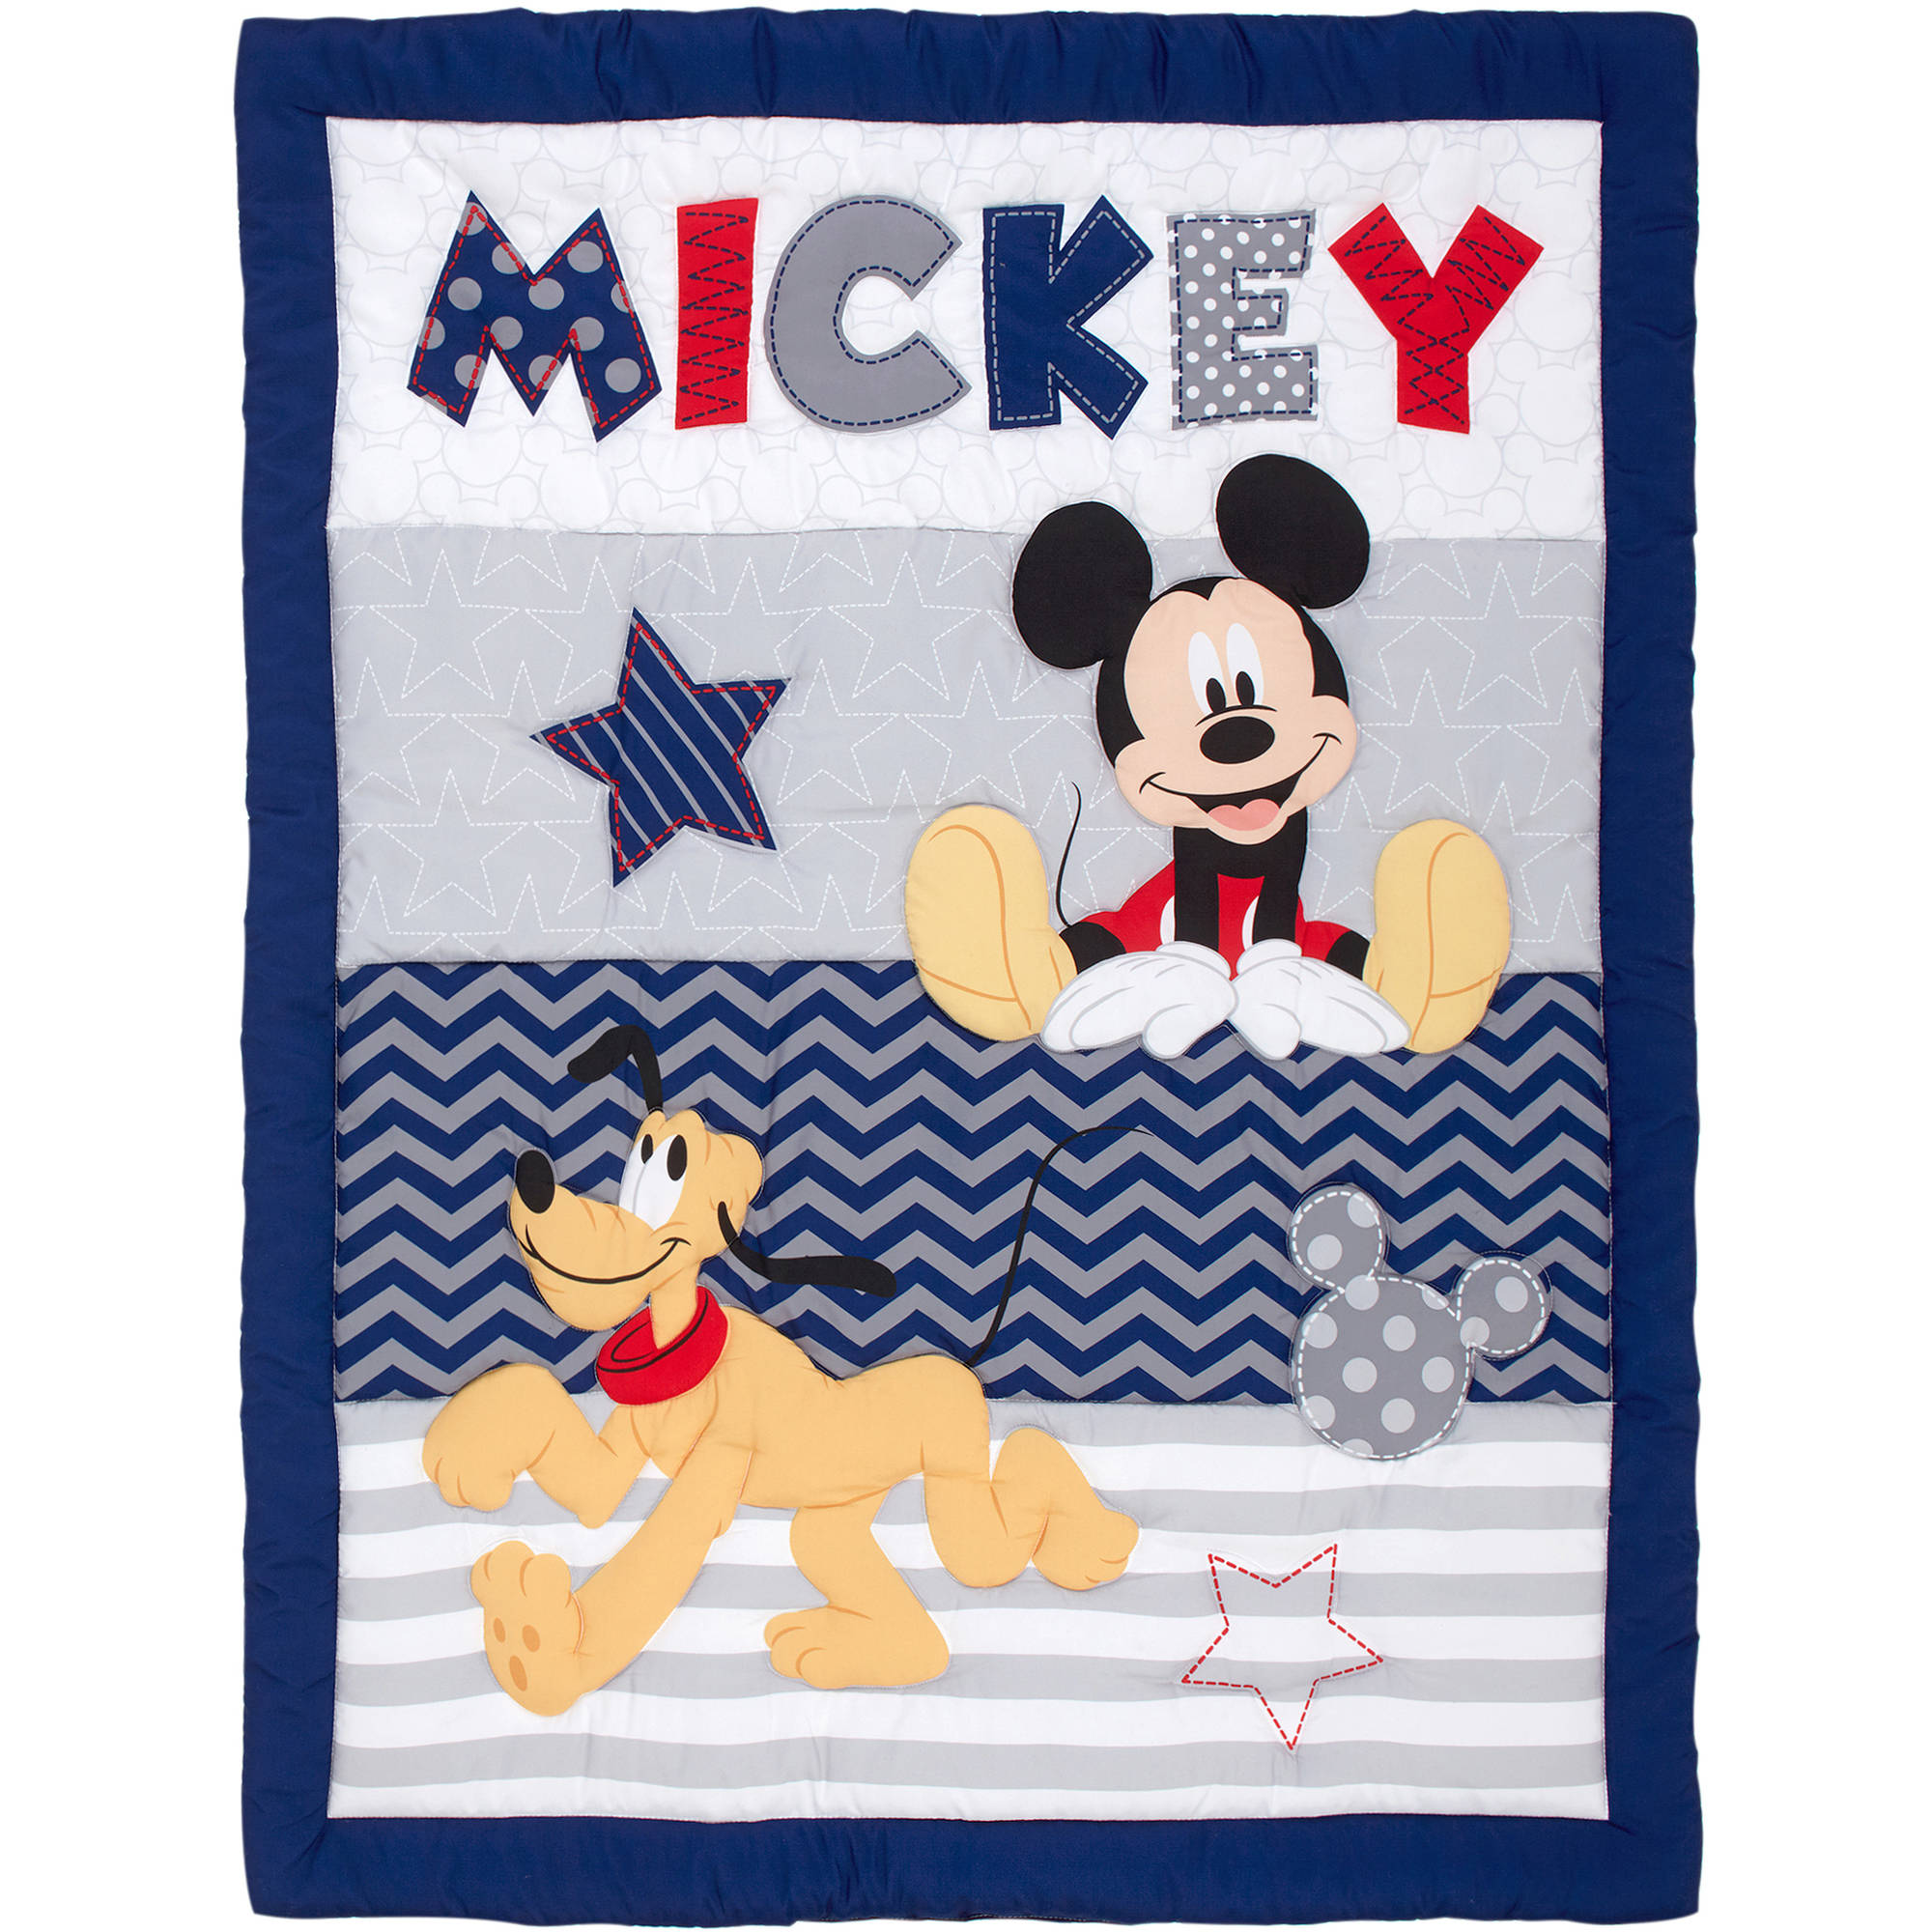 Disney Mickey Mouse 4-Piece Crib Bedding Set, Blue, Let's Go Mickey II - image 4 of 7